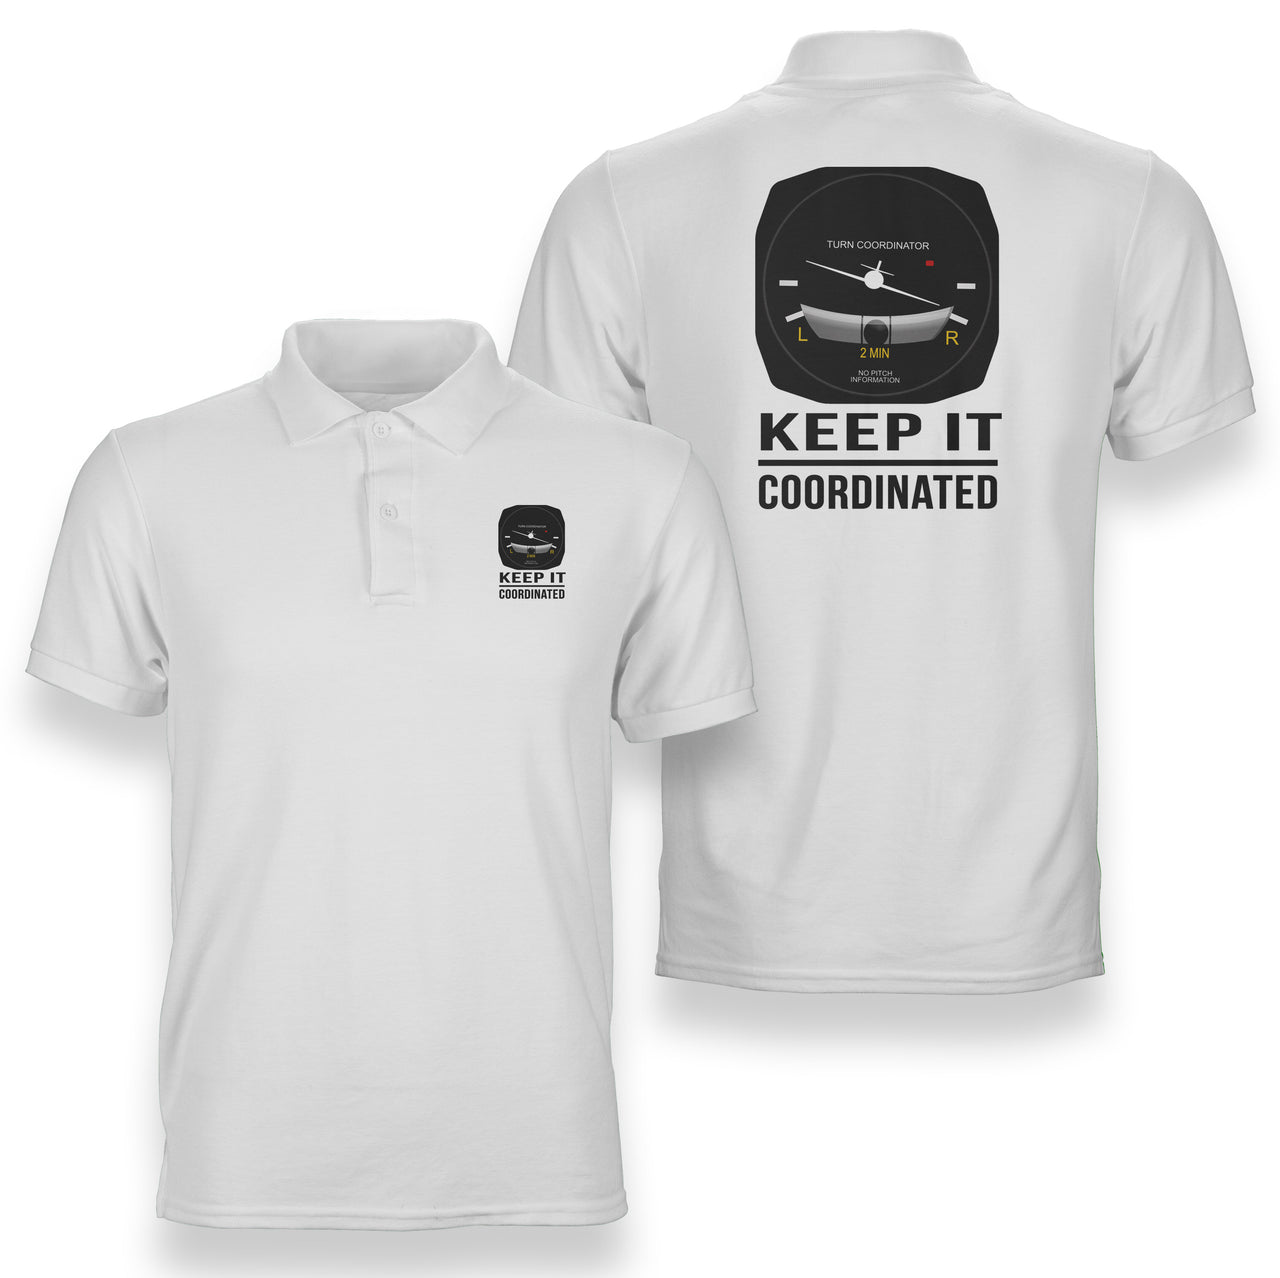 Keep It Coordinated Designed Double Side Polo T-Shirts